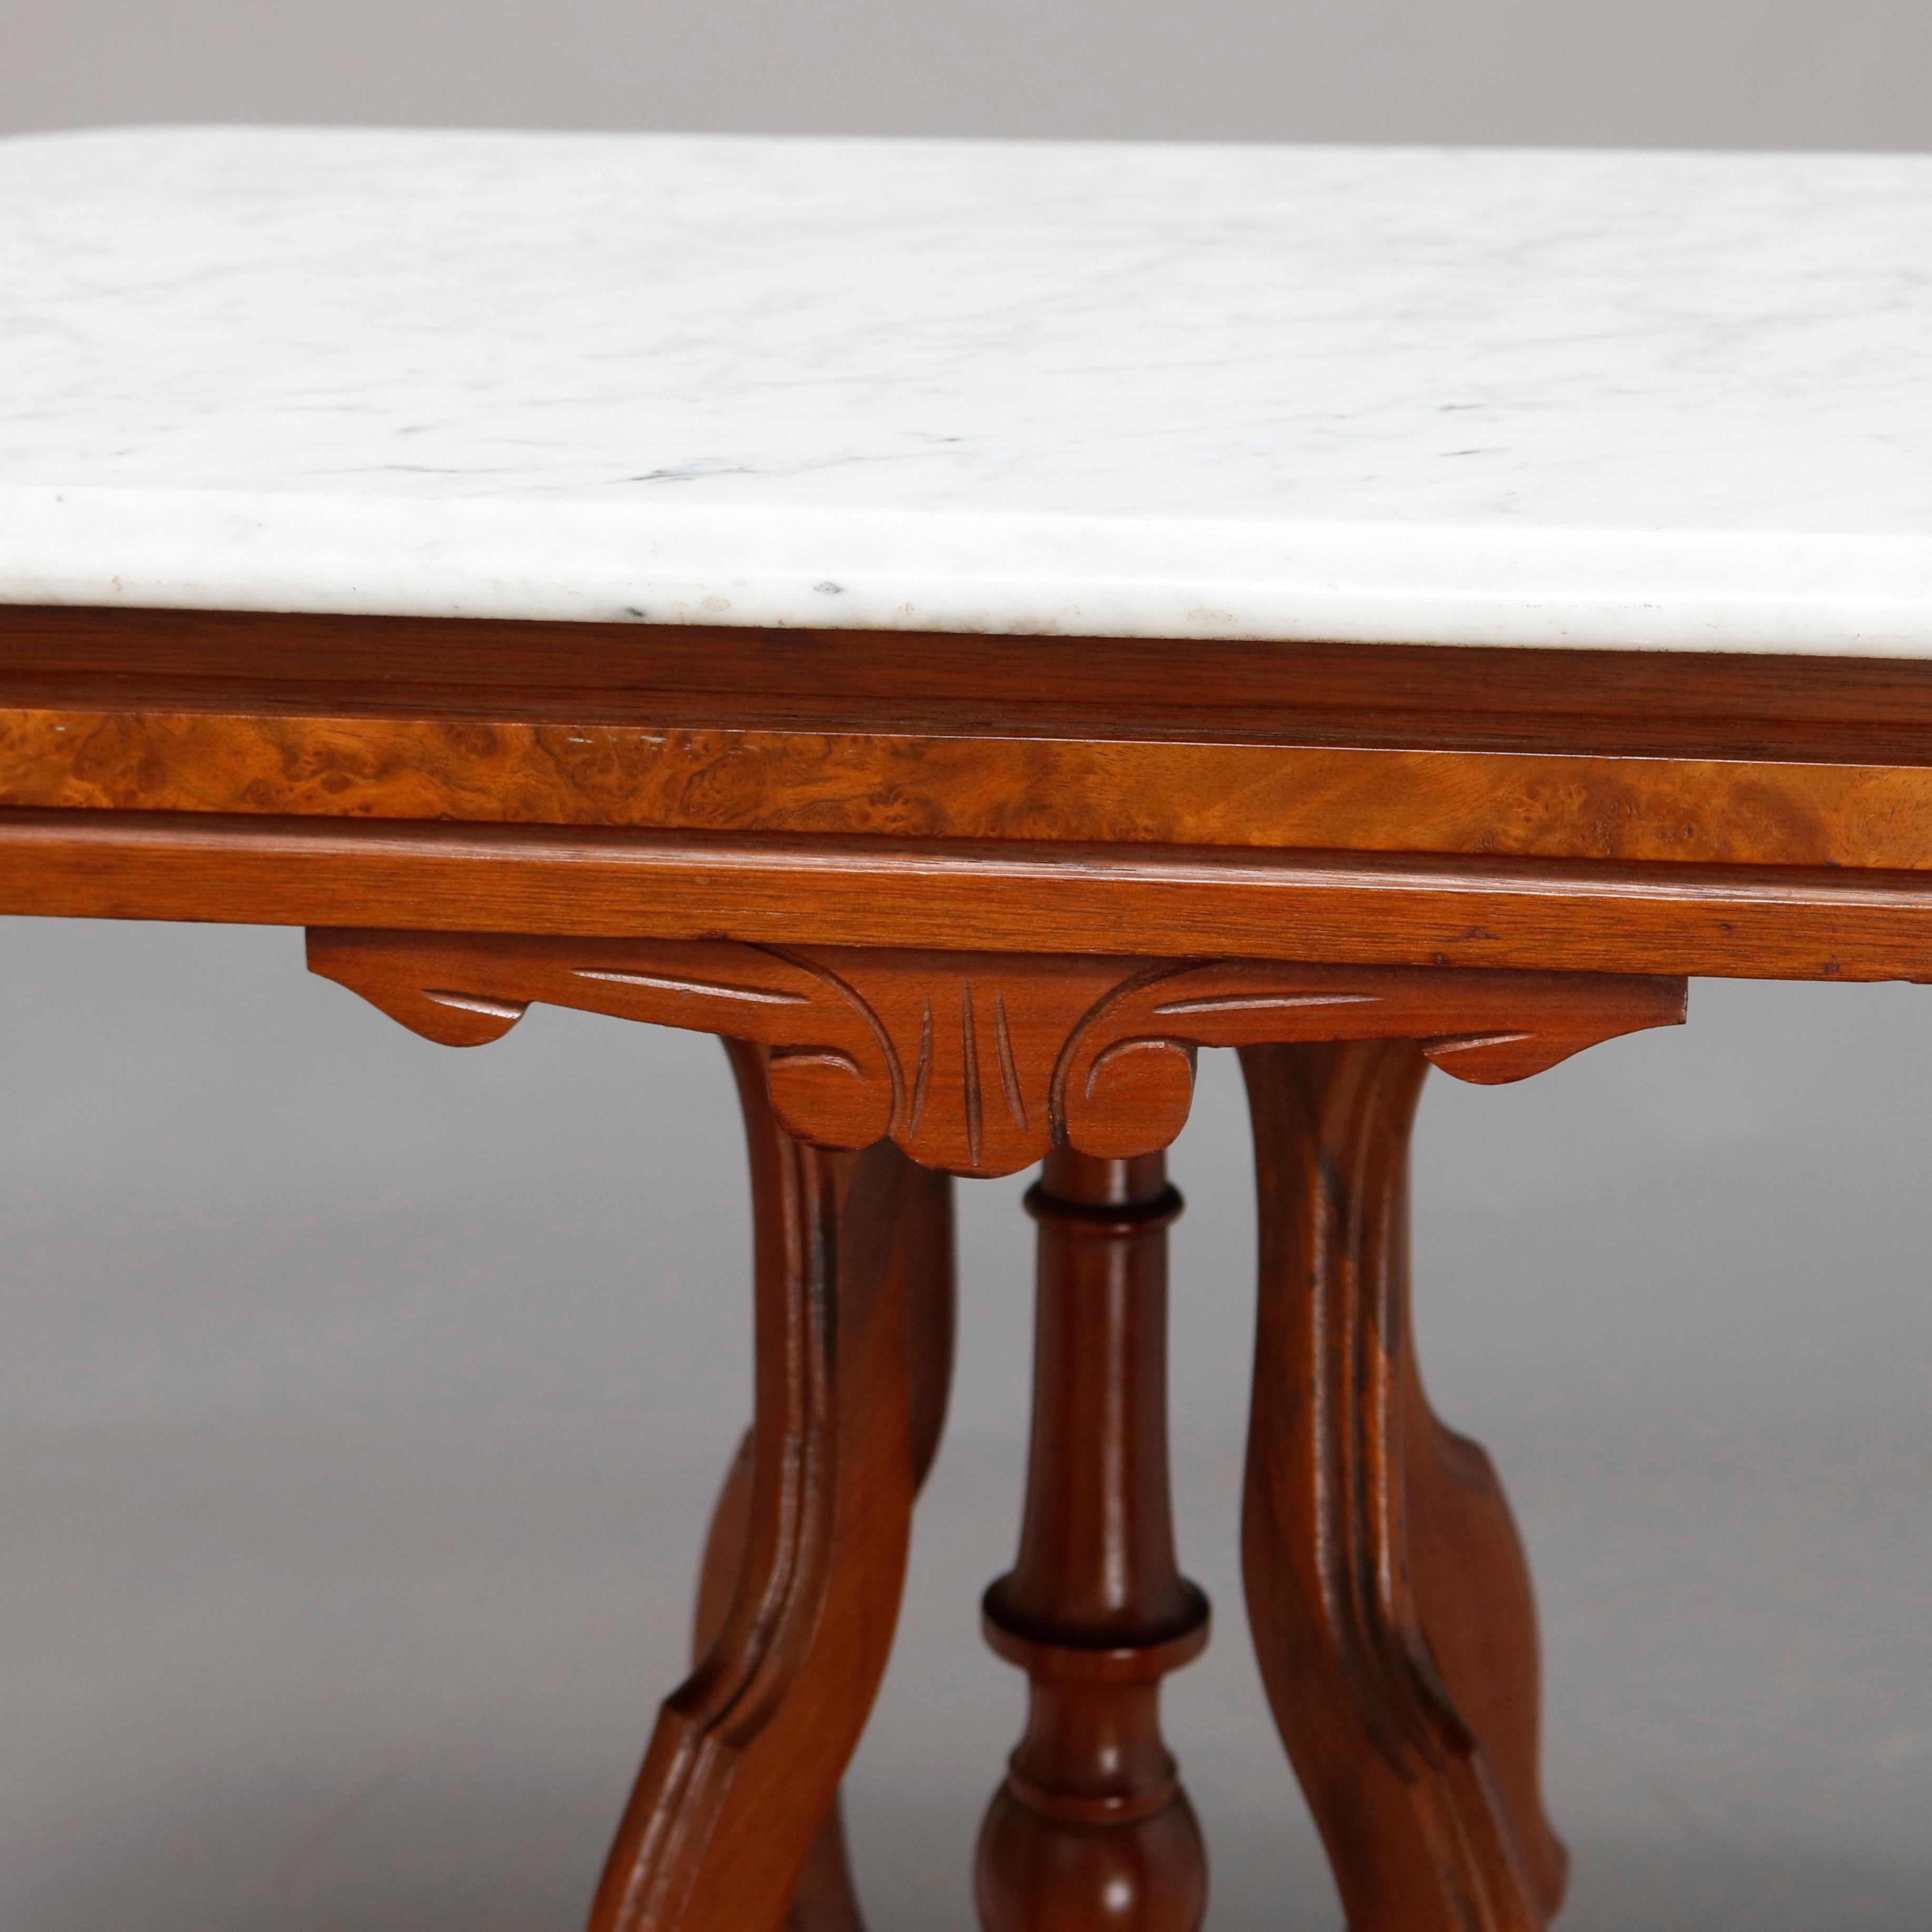 An antique Victorian Eastlake side table offers a beveled rectangular marble top surmounting carved walnut frame having shaped skirt with burl inset, raised on shaped legs with central turned column and drop finial, circa 1880

Measures: 30.25